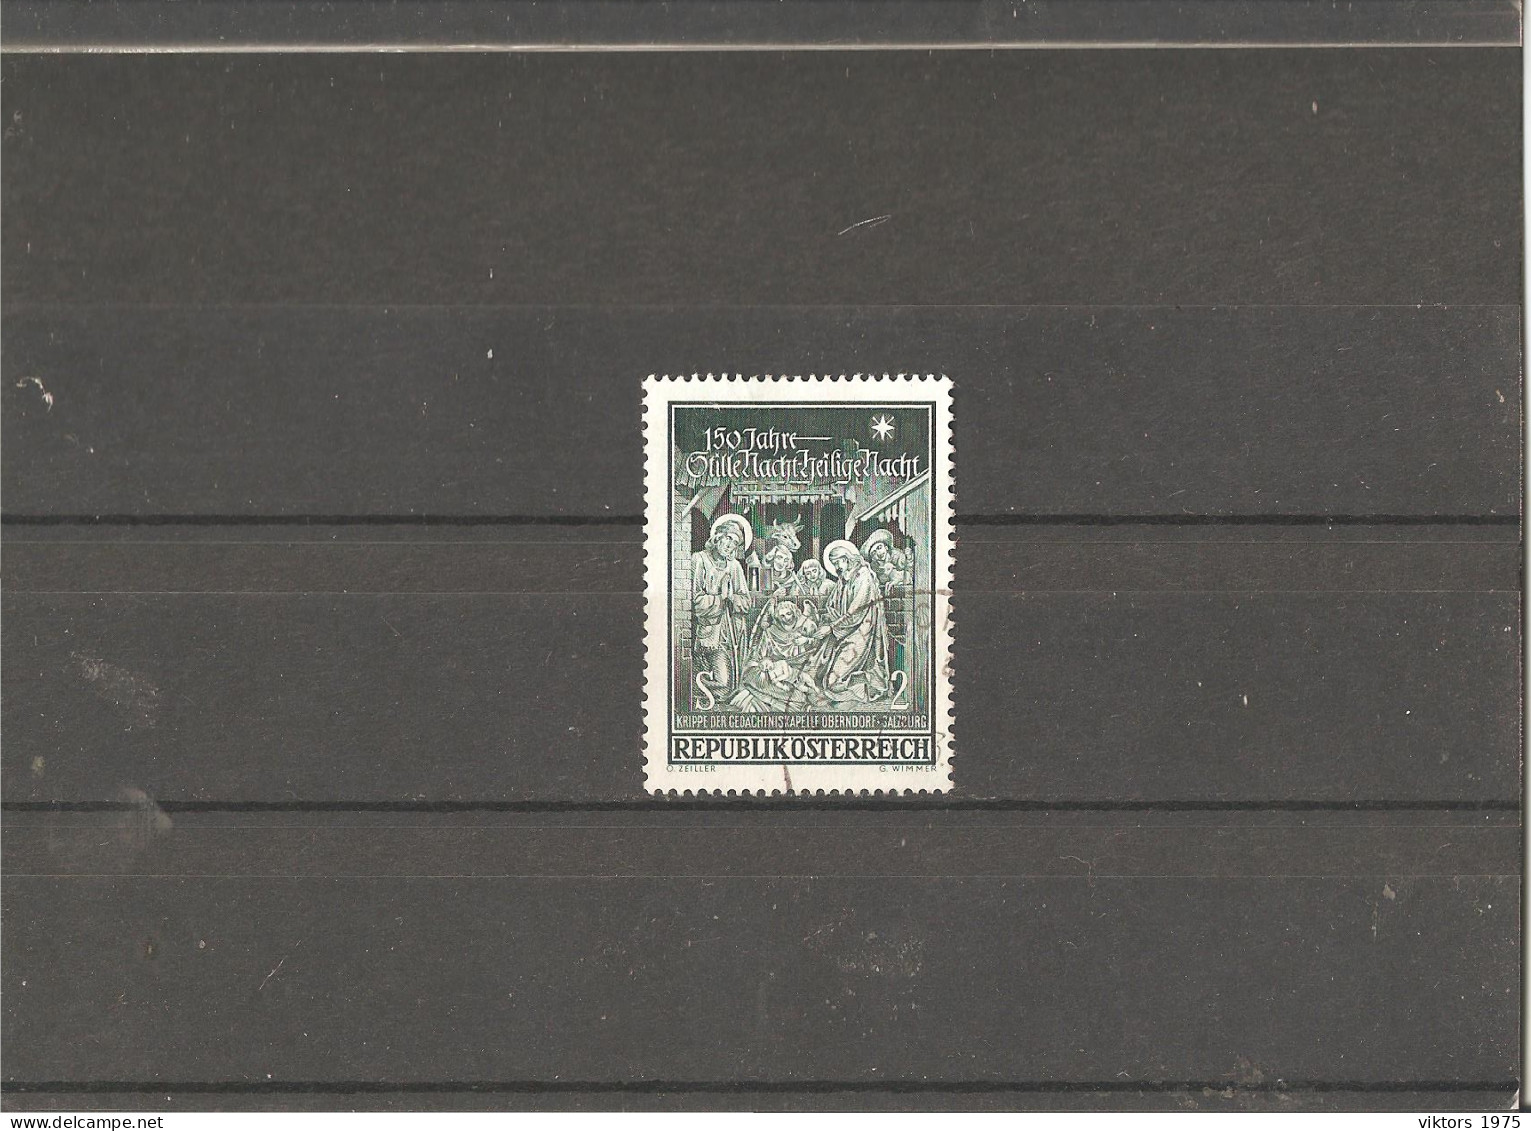 Used Stamp Nr.1276 In MICHEL Catalog - Used Stamps